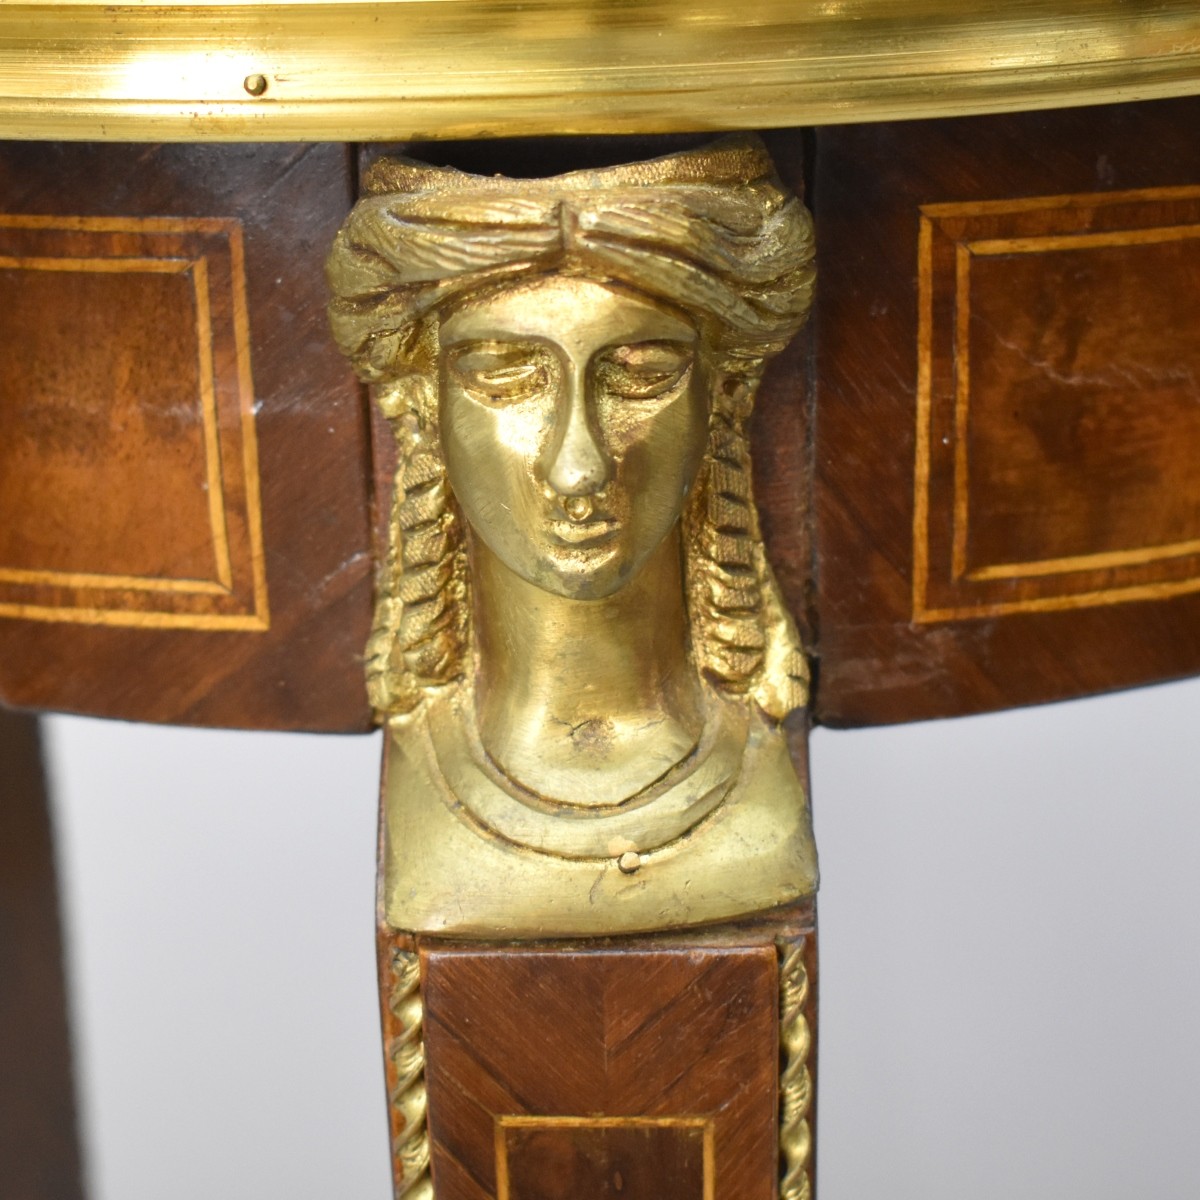 20th C. Empire Style Marble Top Pedestal